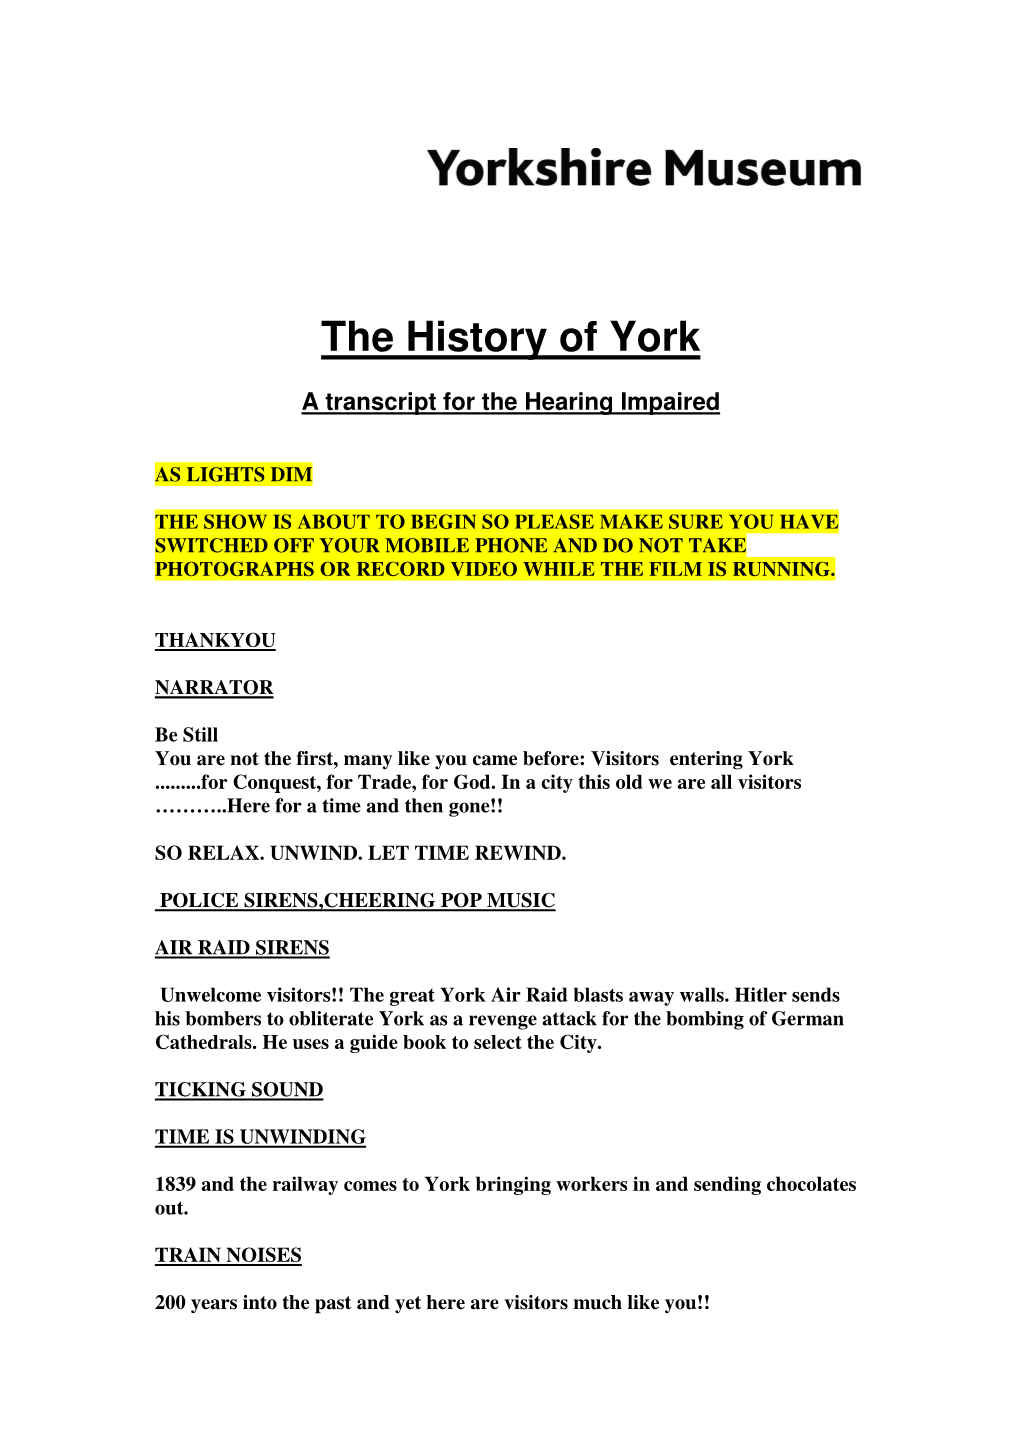 The History of York